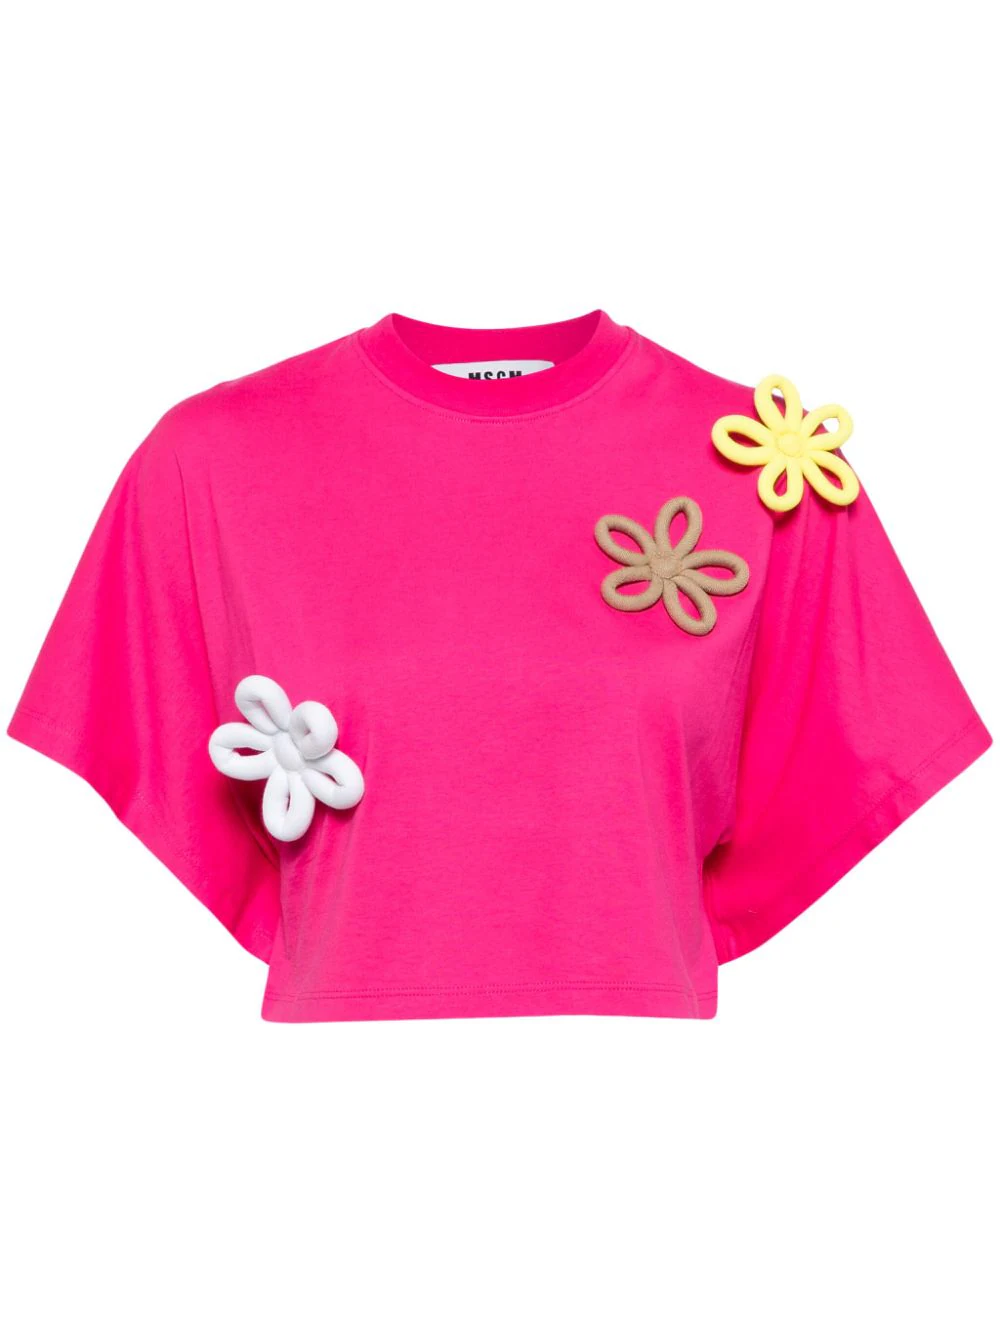 Daisy Applique Cropped T-Shirt